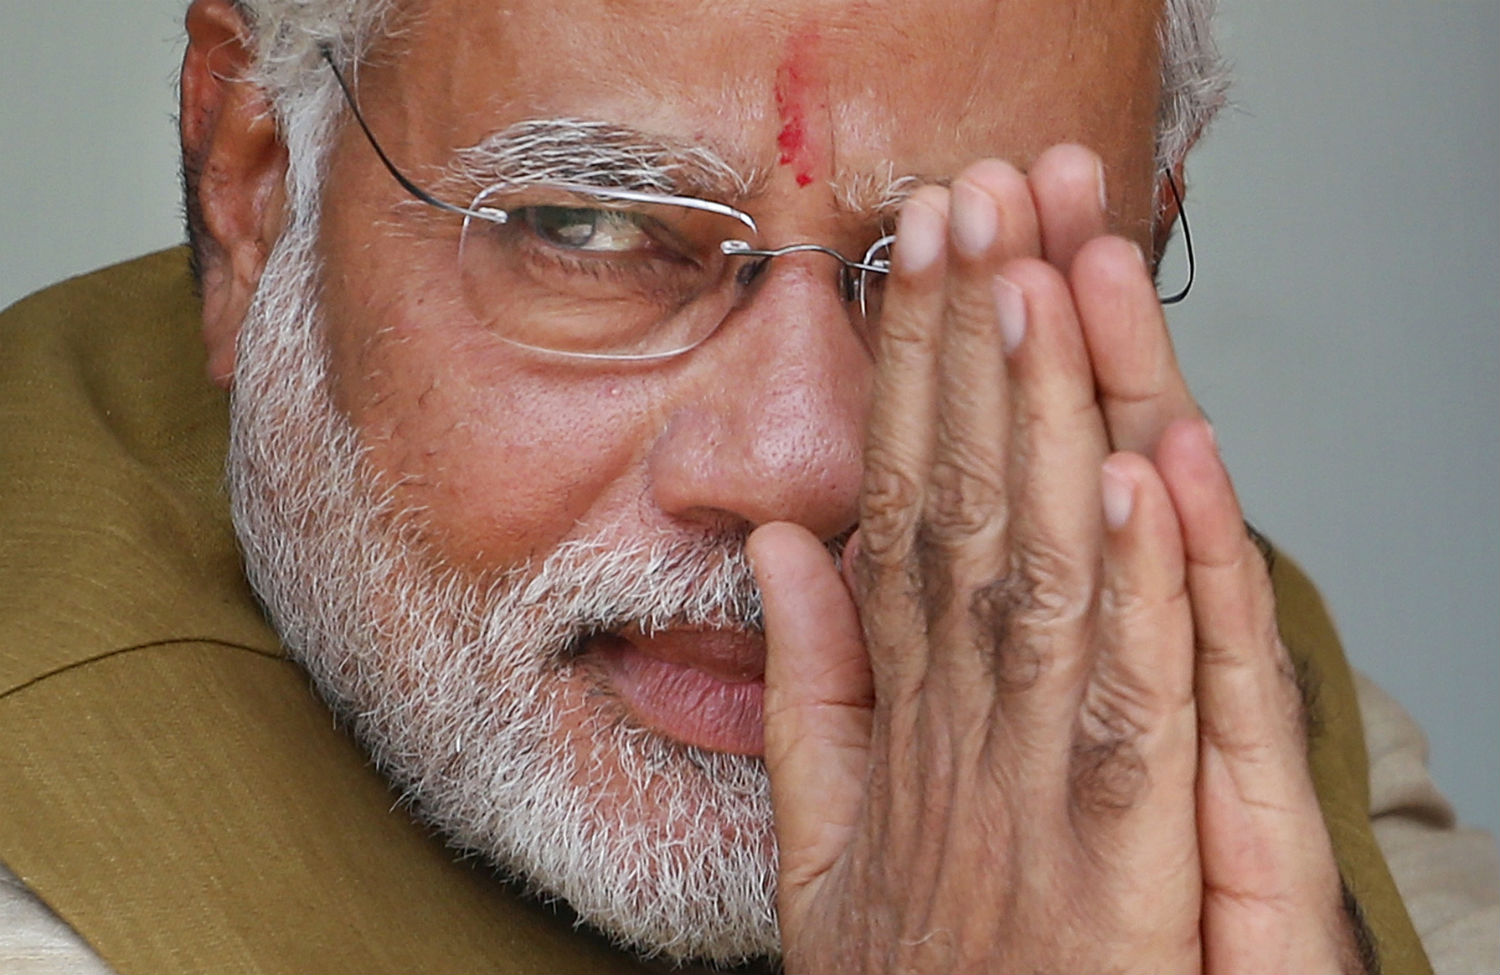 Narenda Modi’s Transformation From International Outcast to India’s Prime Minister